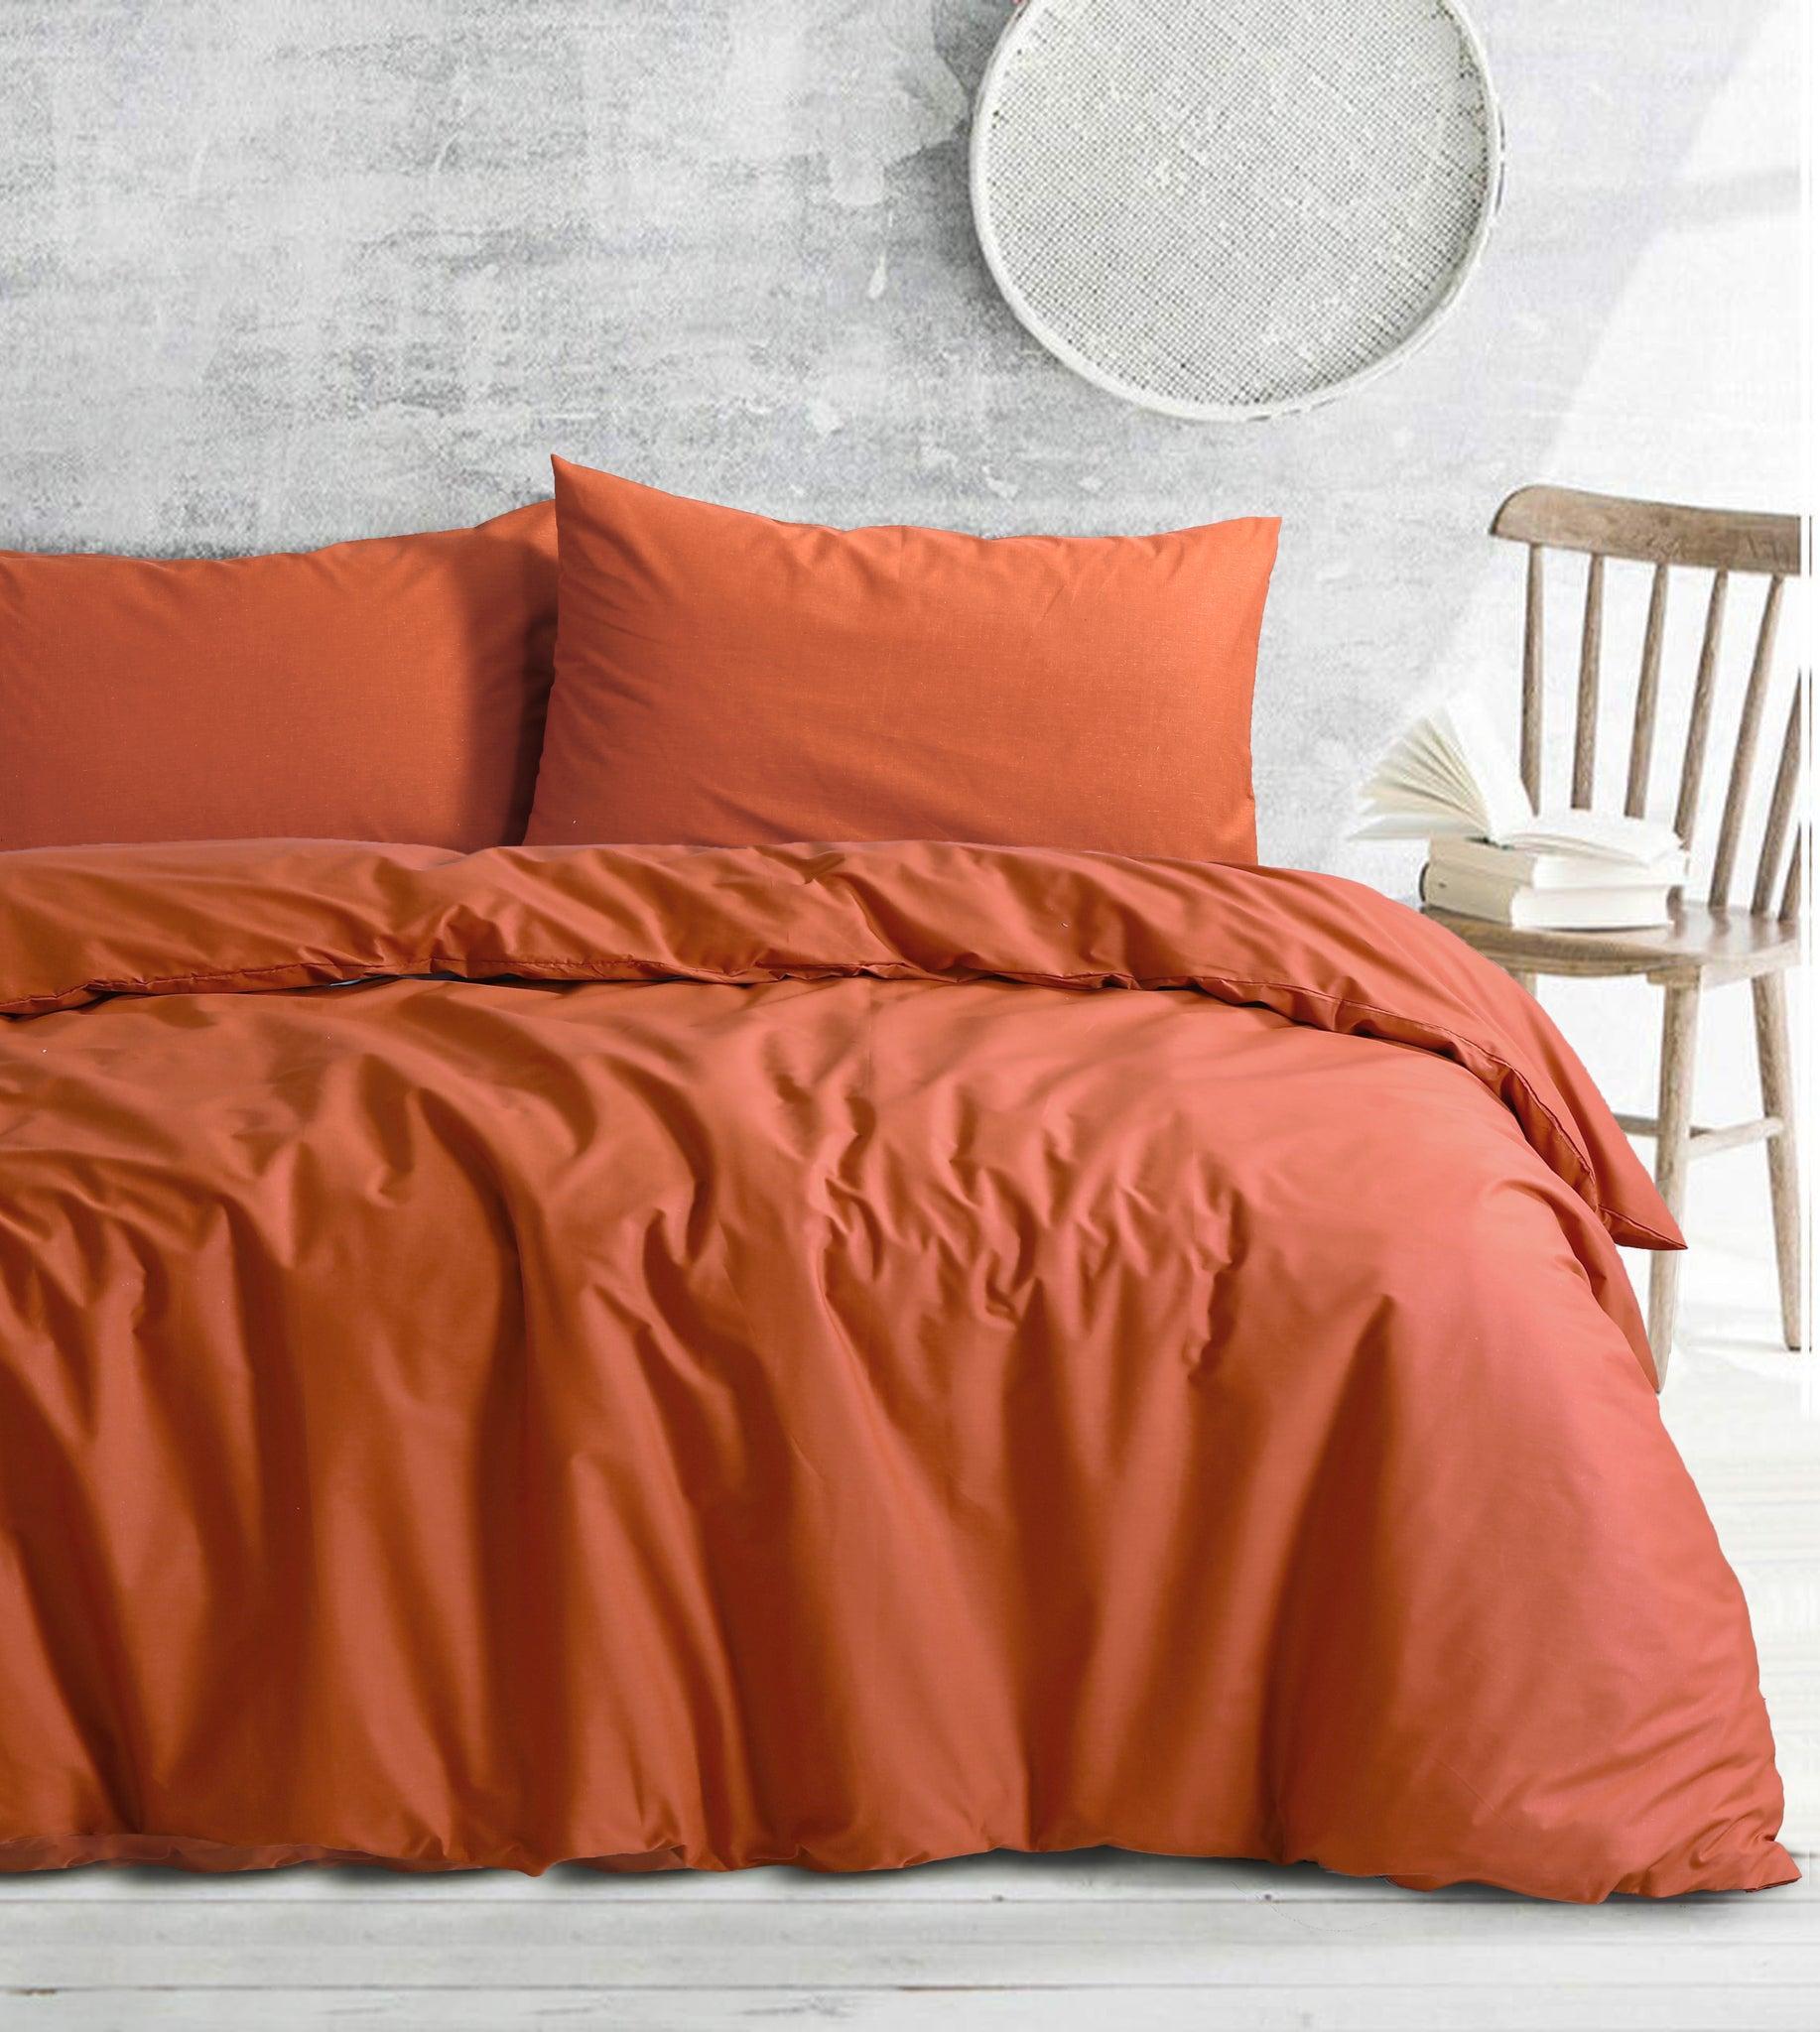 Amsons Royale Cotton King Quilt Duvet Doona Cover Set with Europeon pillowcases - Rust